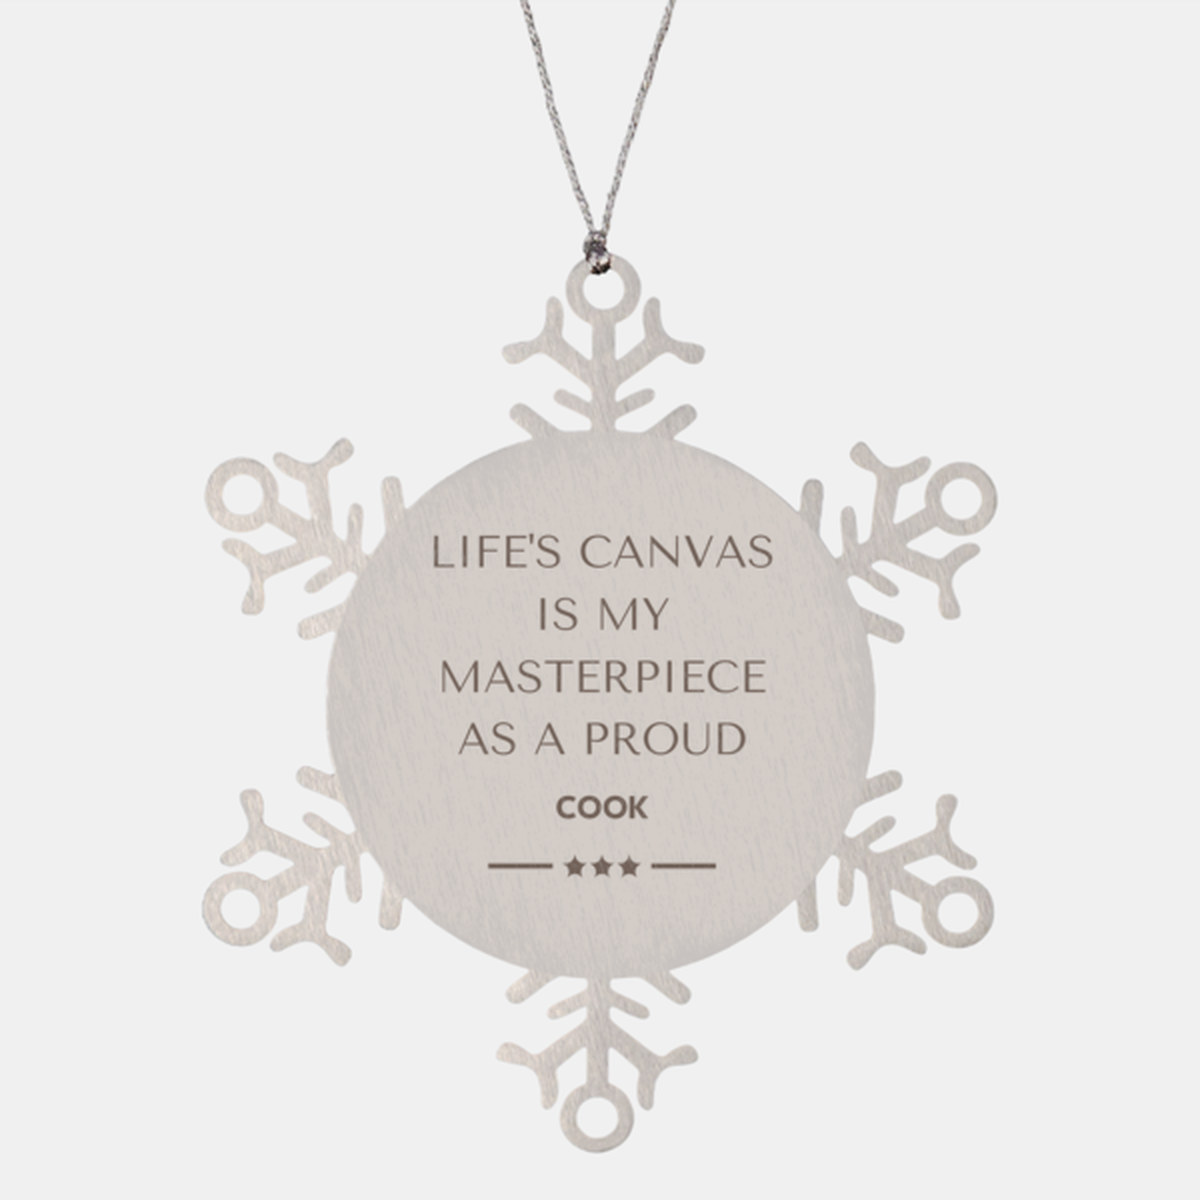 Proud Cook Gifts, Life's canvas is my masterpiece, Epic Birthday Christmas Unique Snowflake Ornament For Cook, Coworkers, Men, Women, Friends